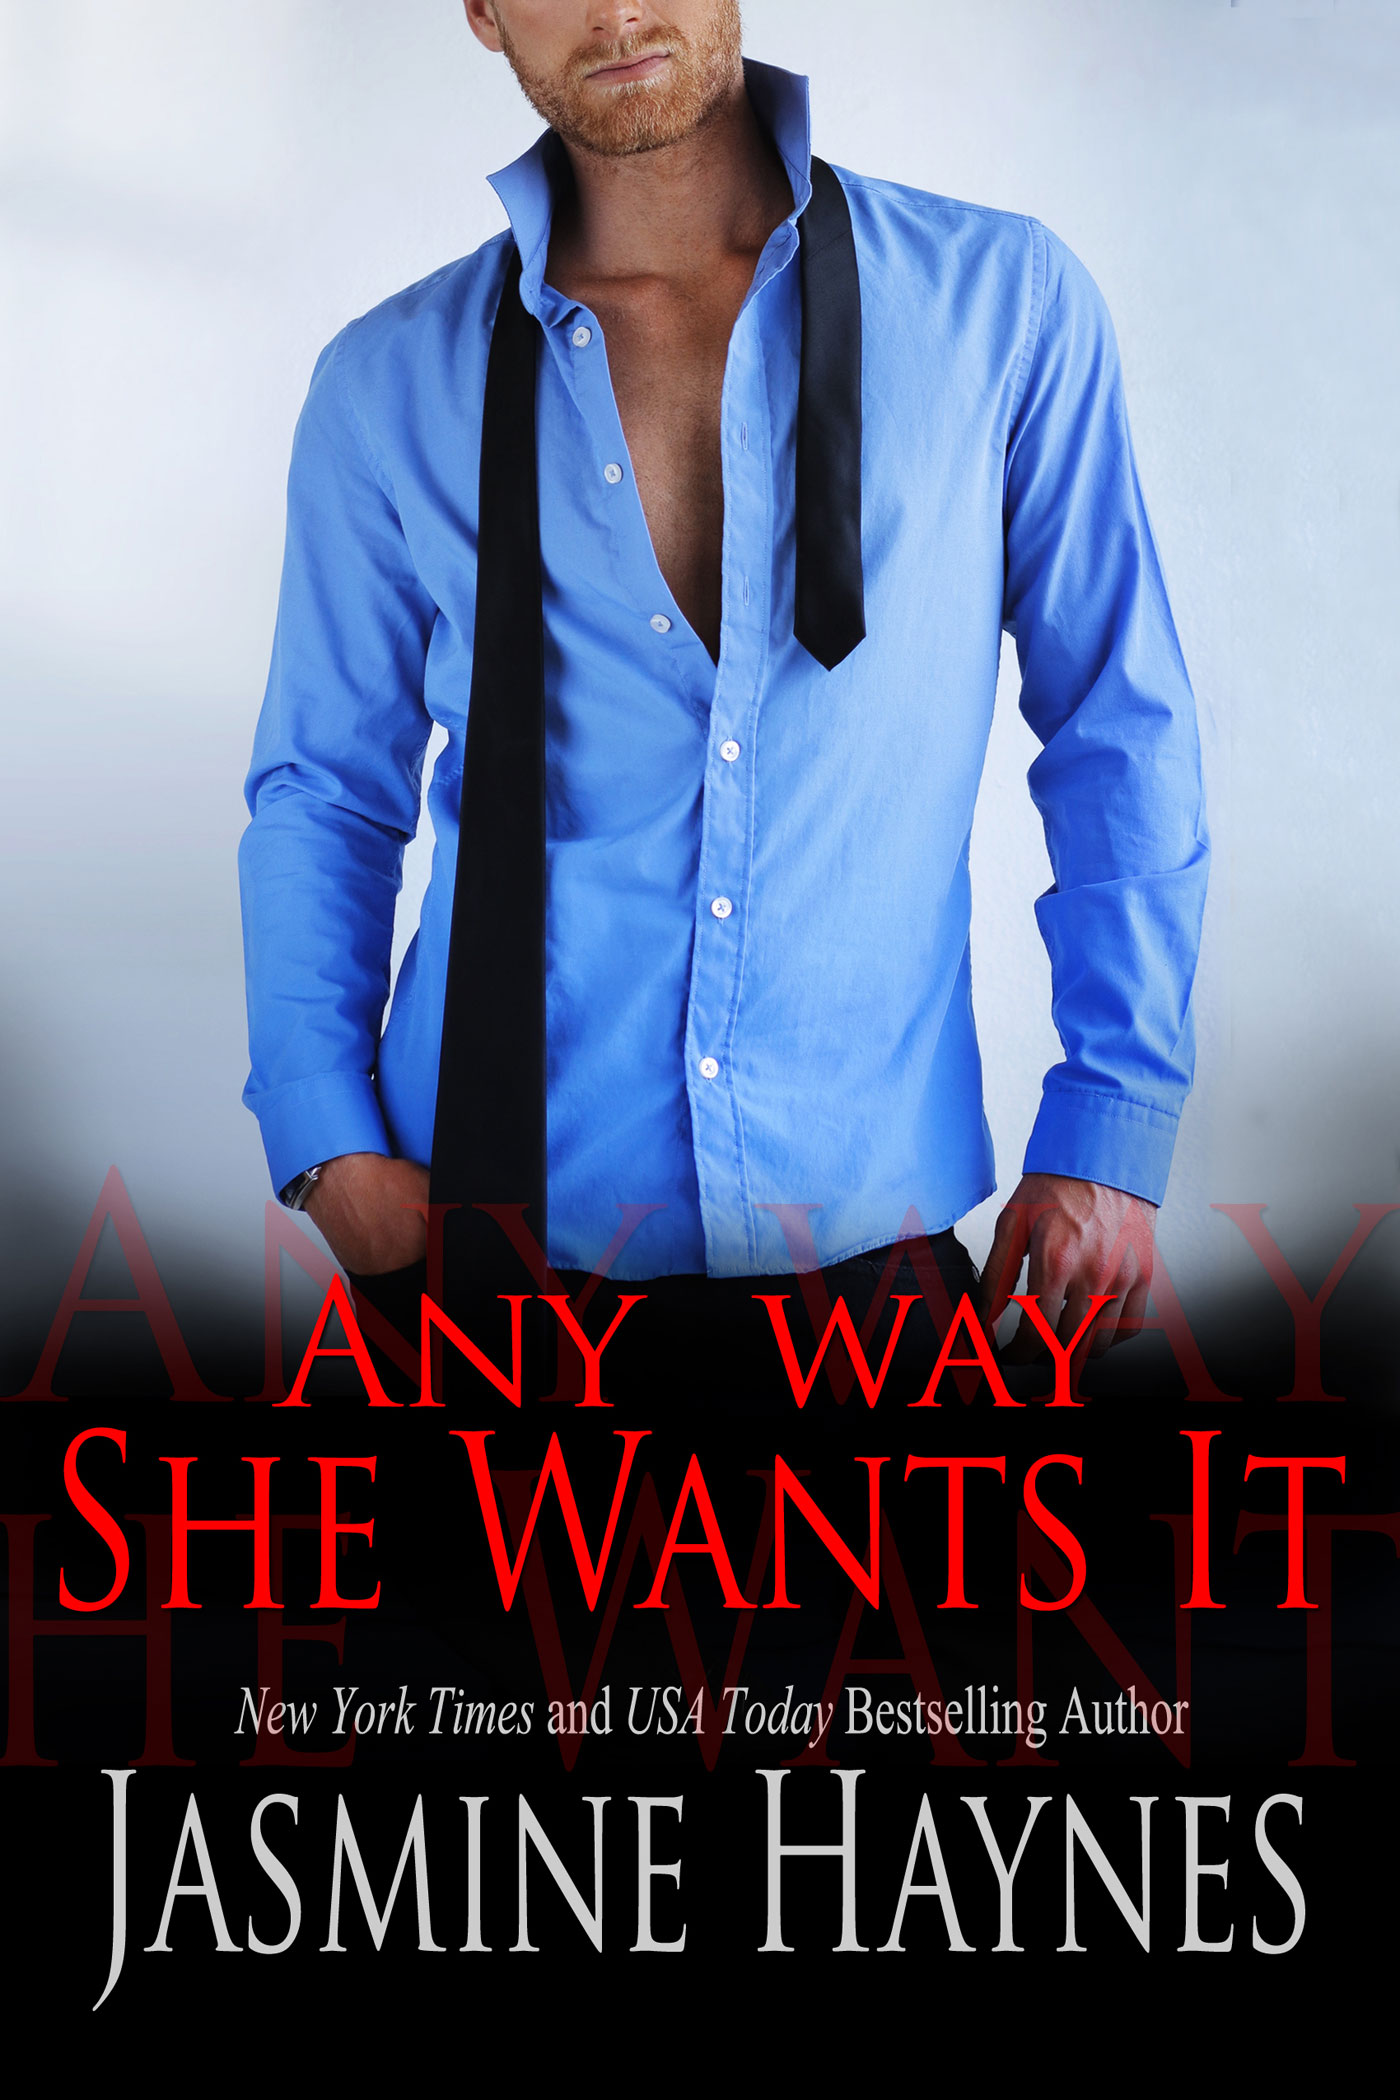 Cover of Any Way She Wants It by New York Times and USA Today Bestselling Author Jasmine Haynes